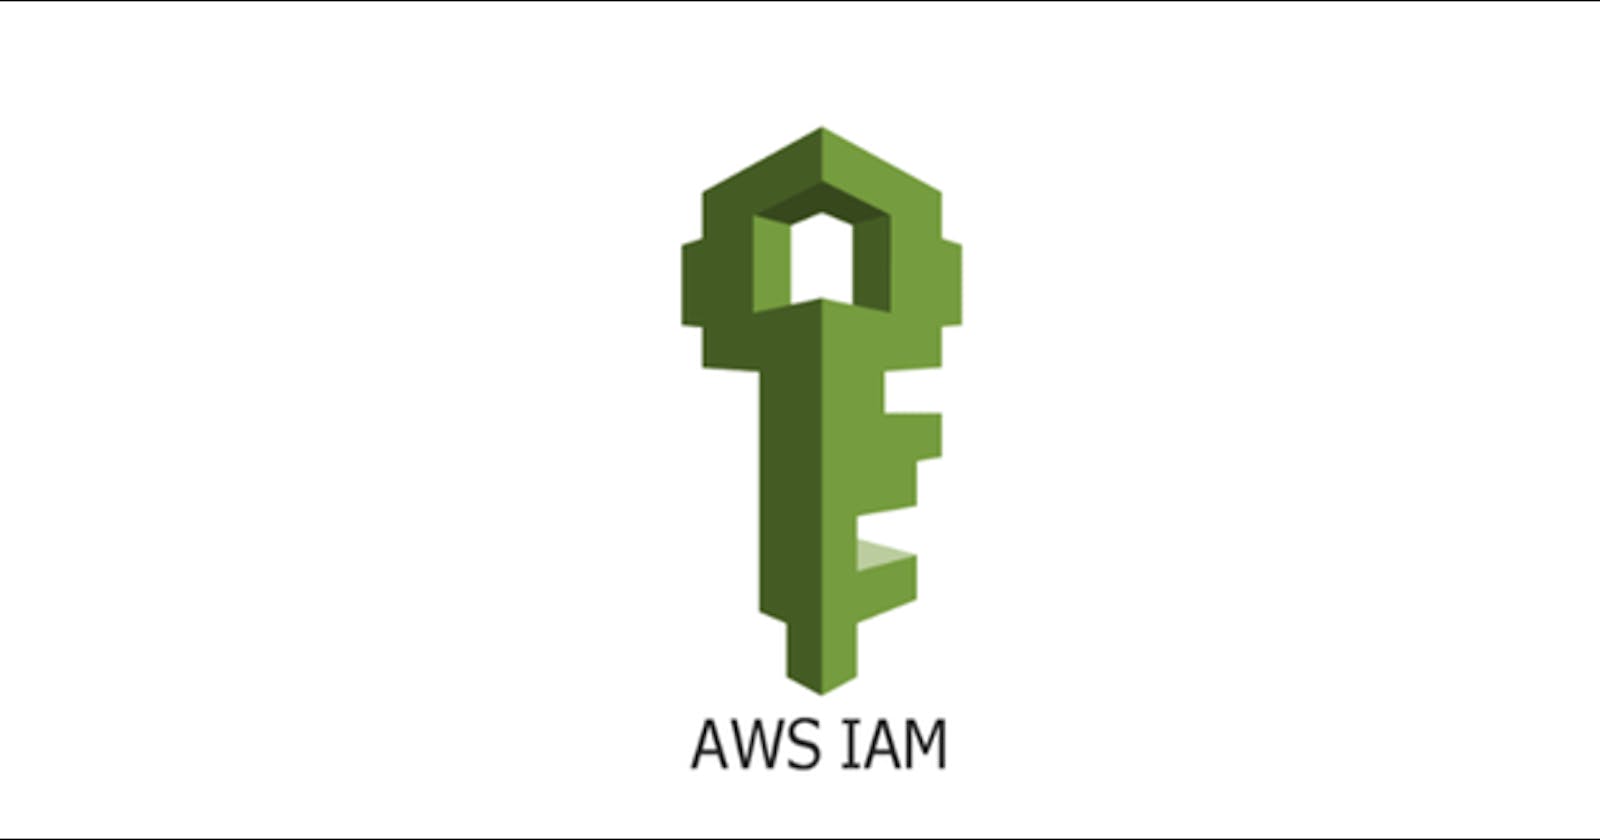 Configuring AWS CLI (Command Line Interface) with IAM User Account